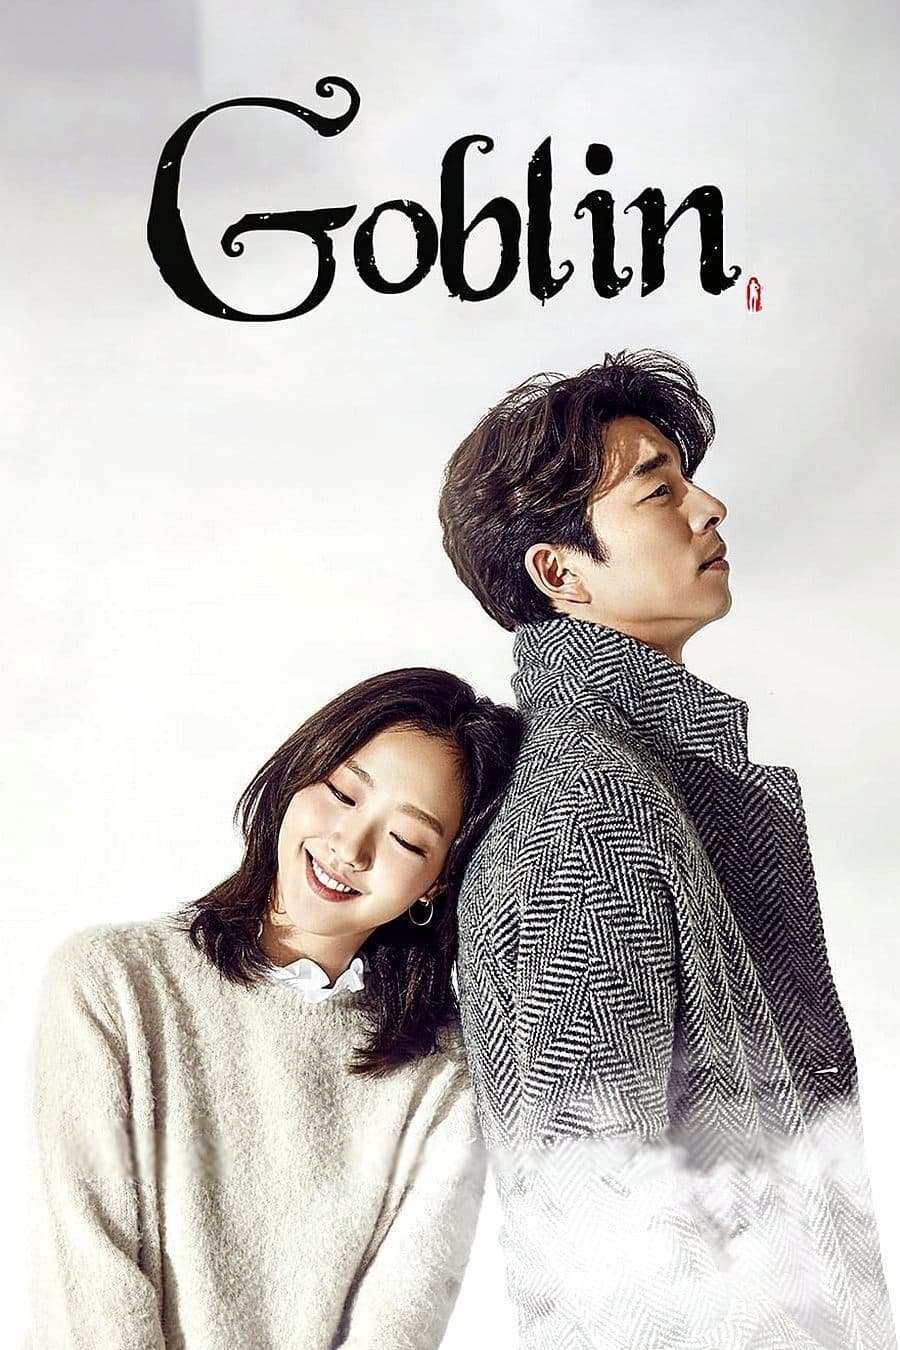 Goblin: The Lonely and Great God - Série 2016 - AdoroCinema